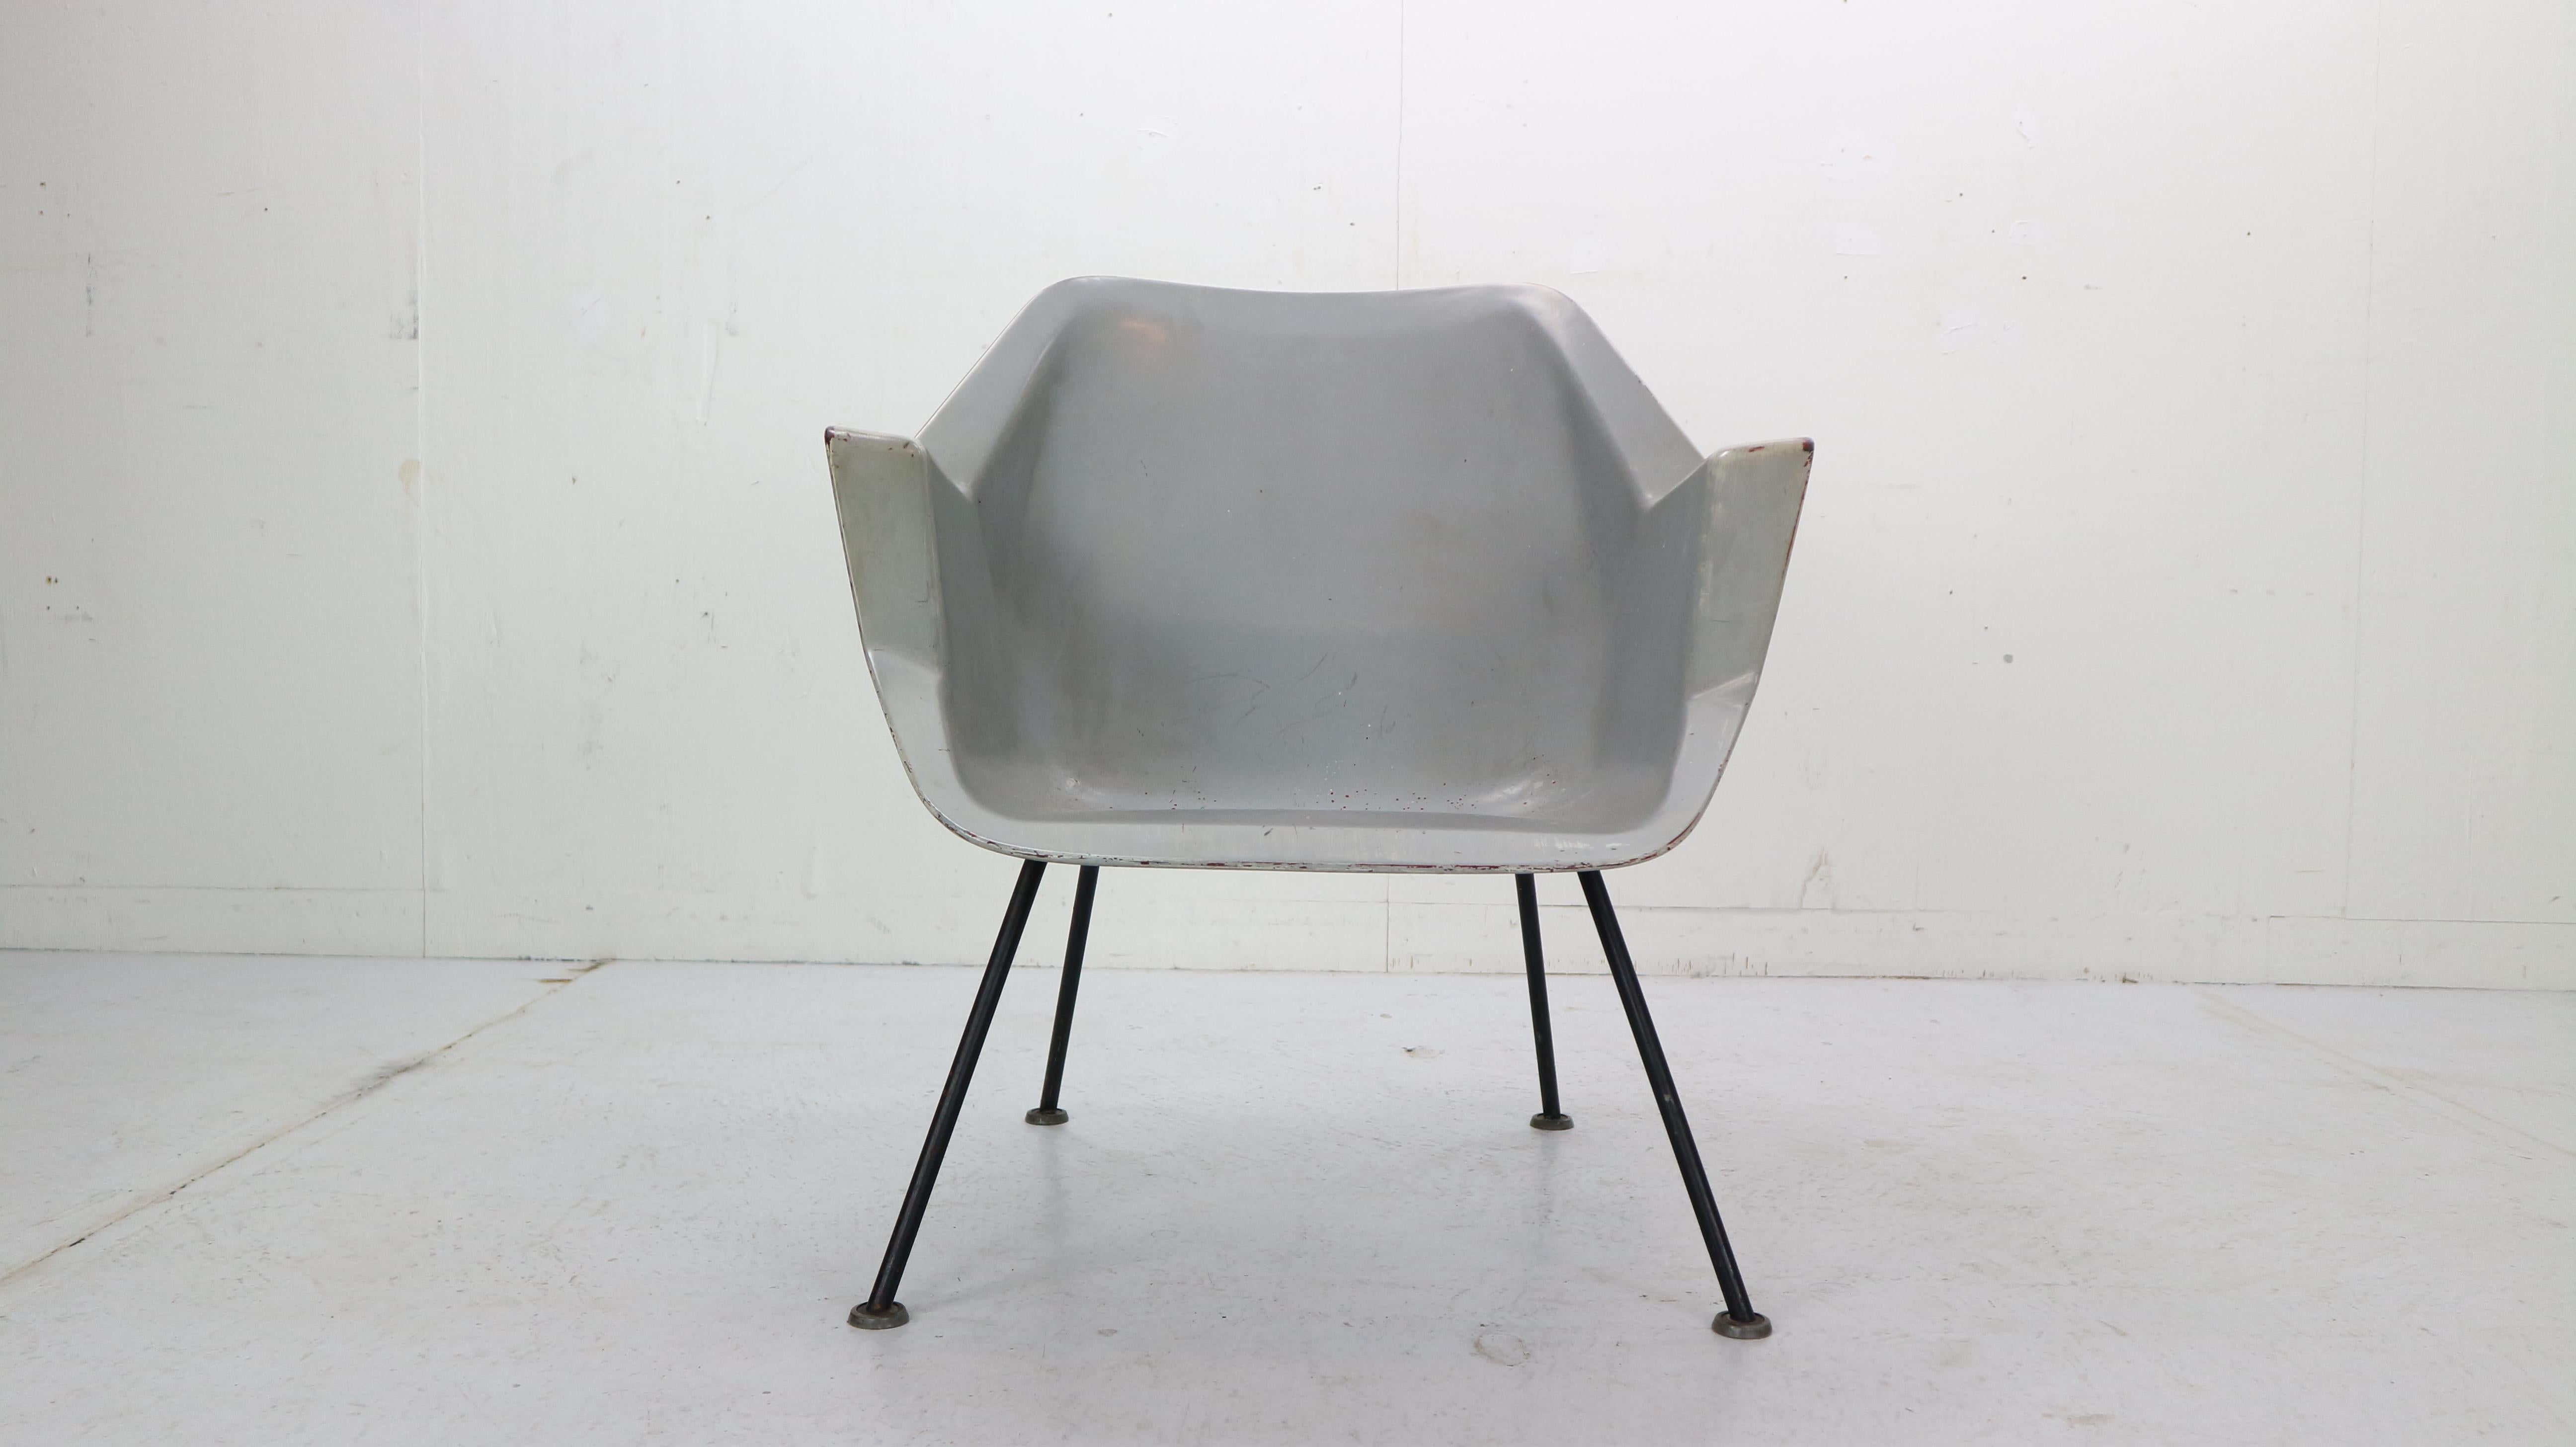 Minimalistic Dutch pride design- no. 416 model lounge/ armchair designed by Wim Rietveld (son of Gerrit Thomas Rietveld) and Andre Cordemeyer for Gispen, Culemborg, 1957.
This first Dutch polyester armchair was made of on piece of molded polyester,